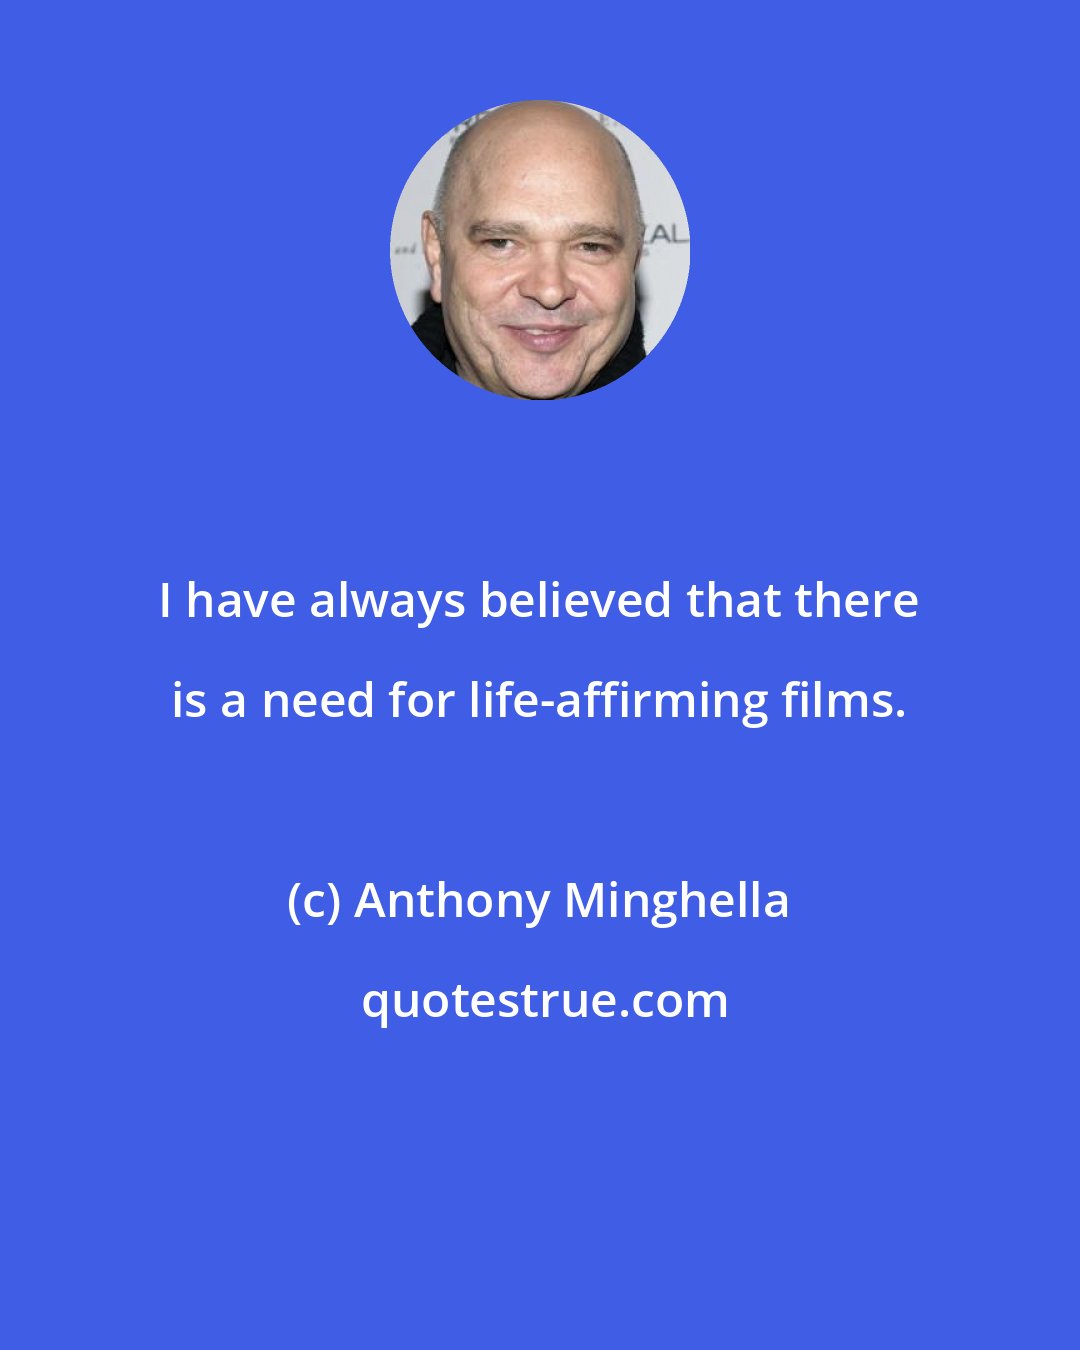 Anthony Minghella: I have always believed that there is a need for life-affirming films.